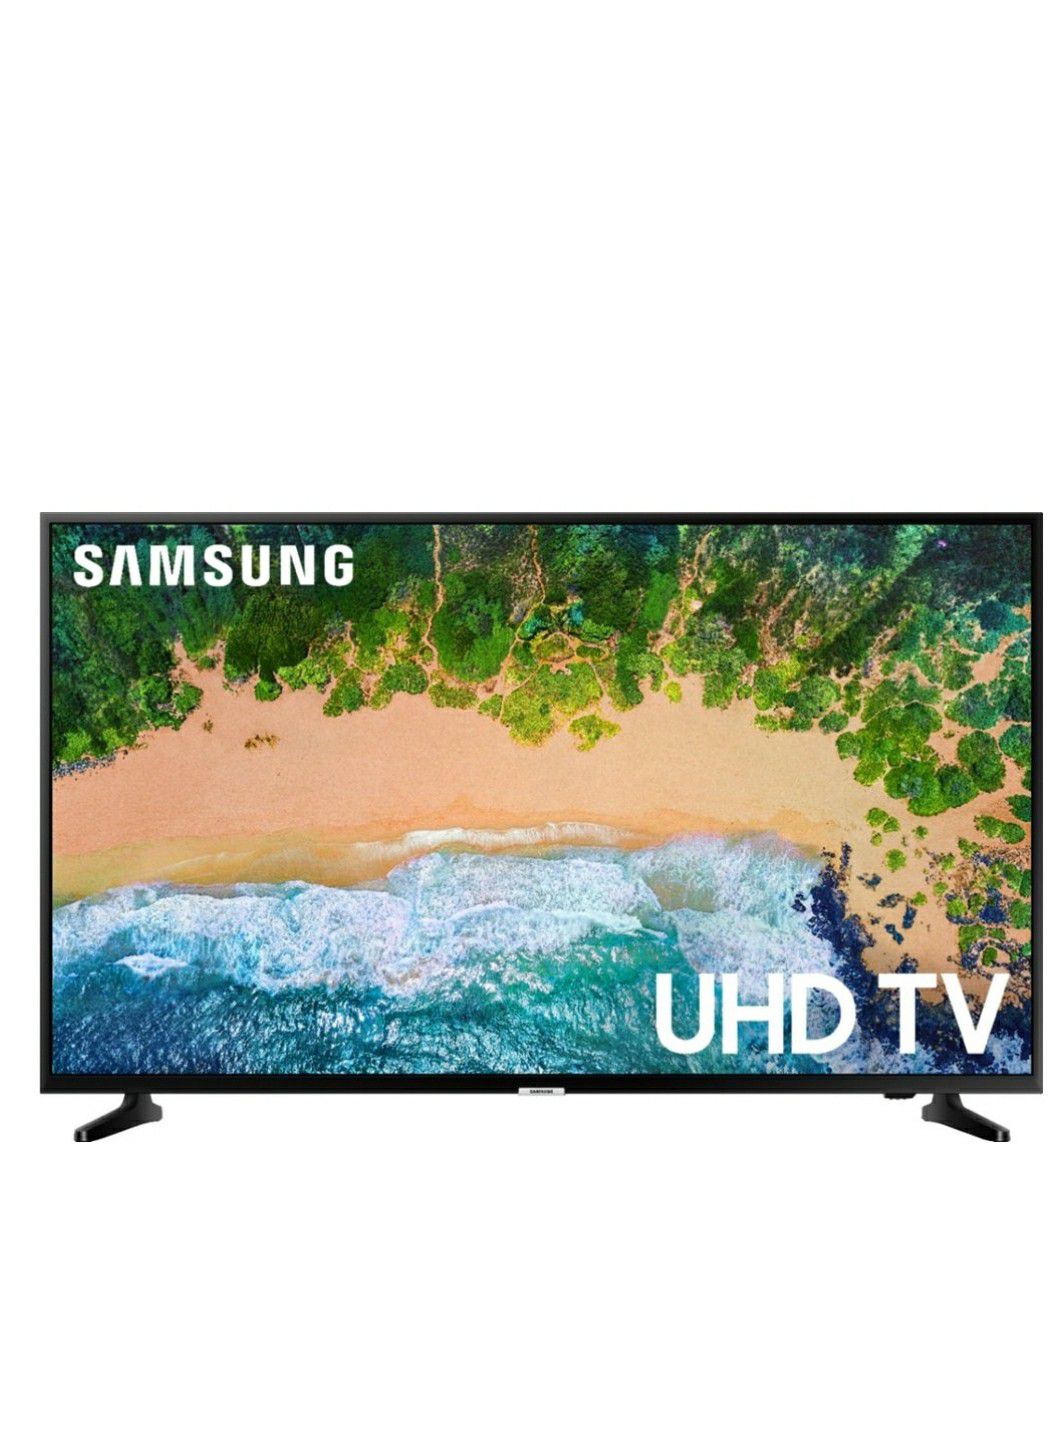 Moving selling tvs and ps4 real cheap